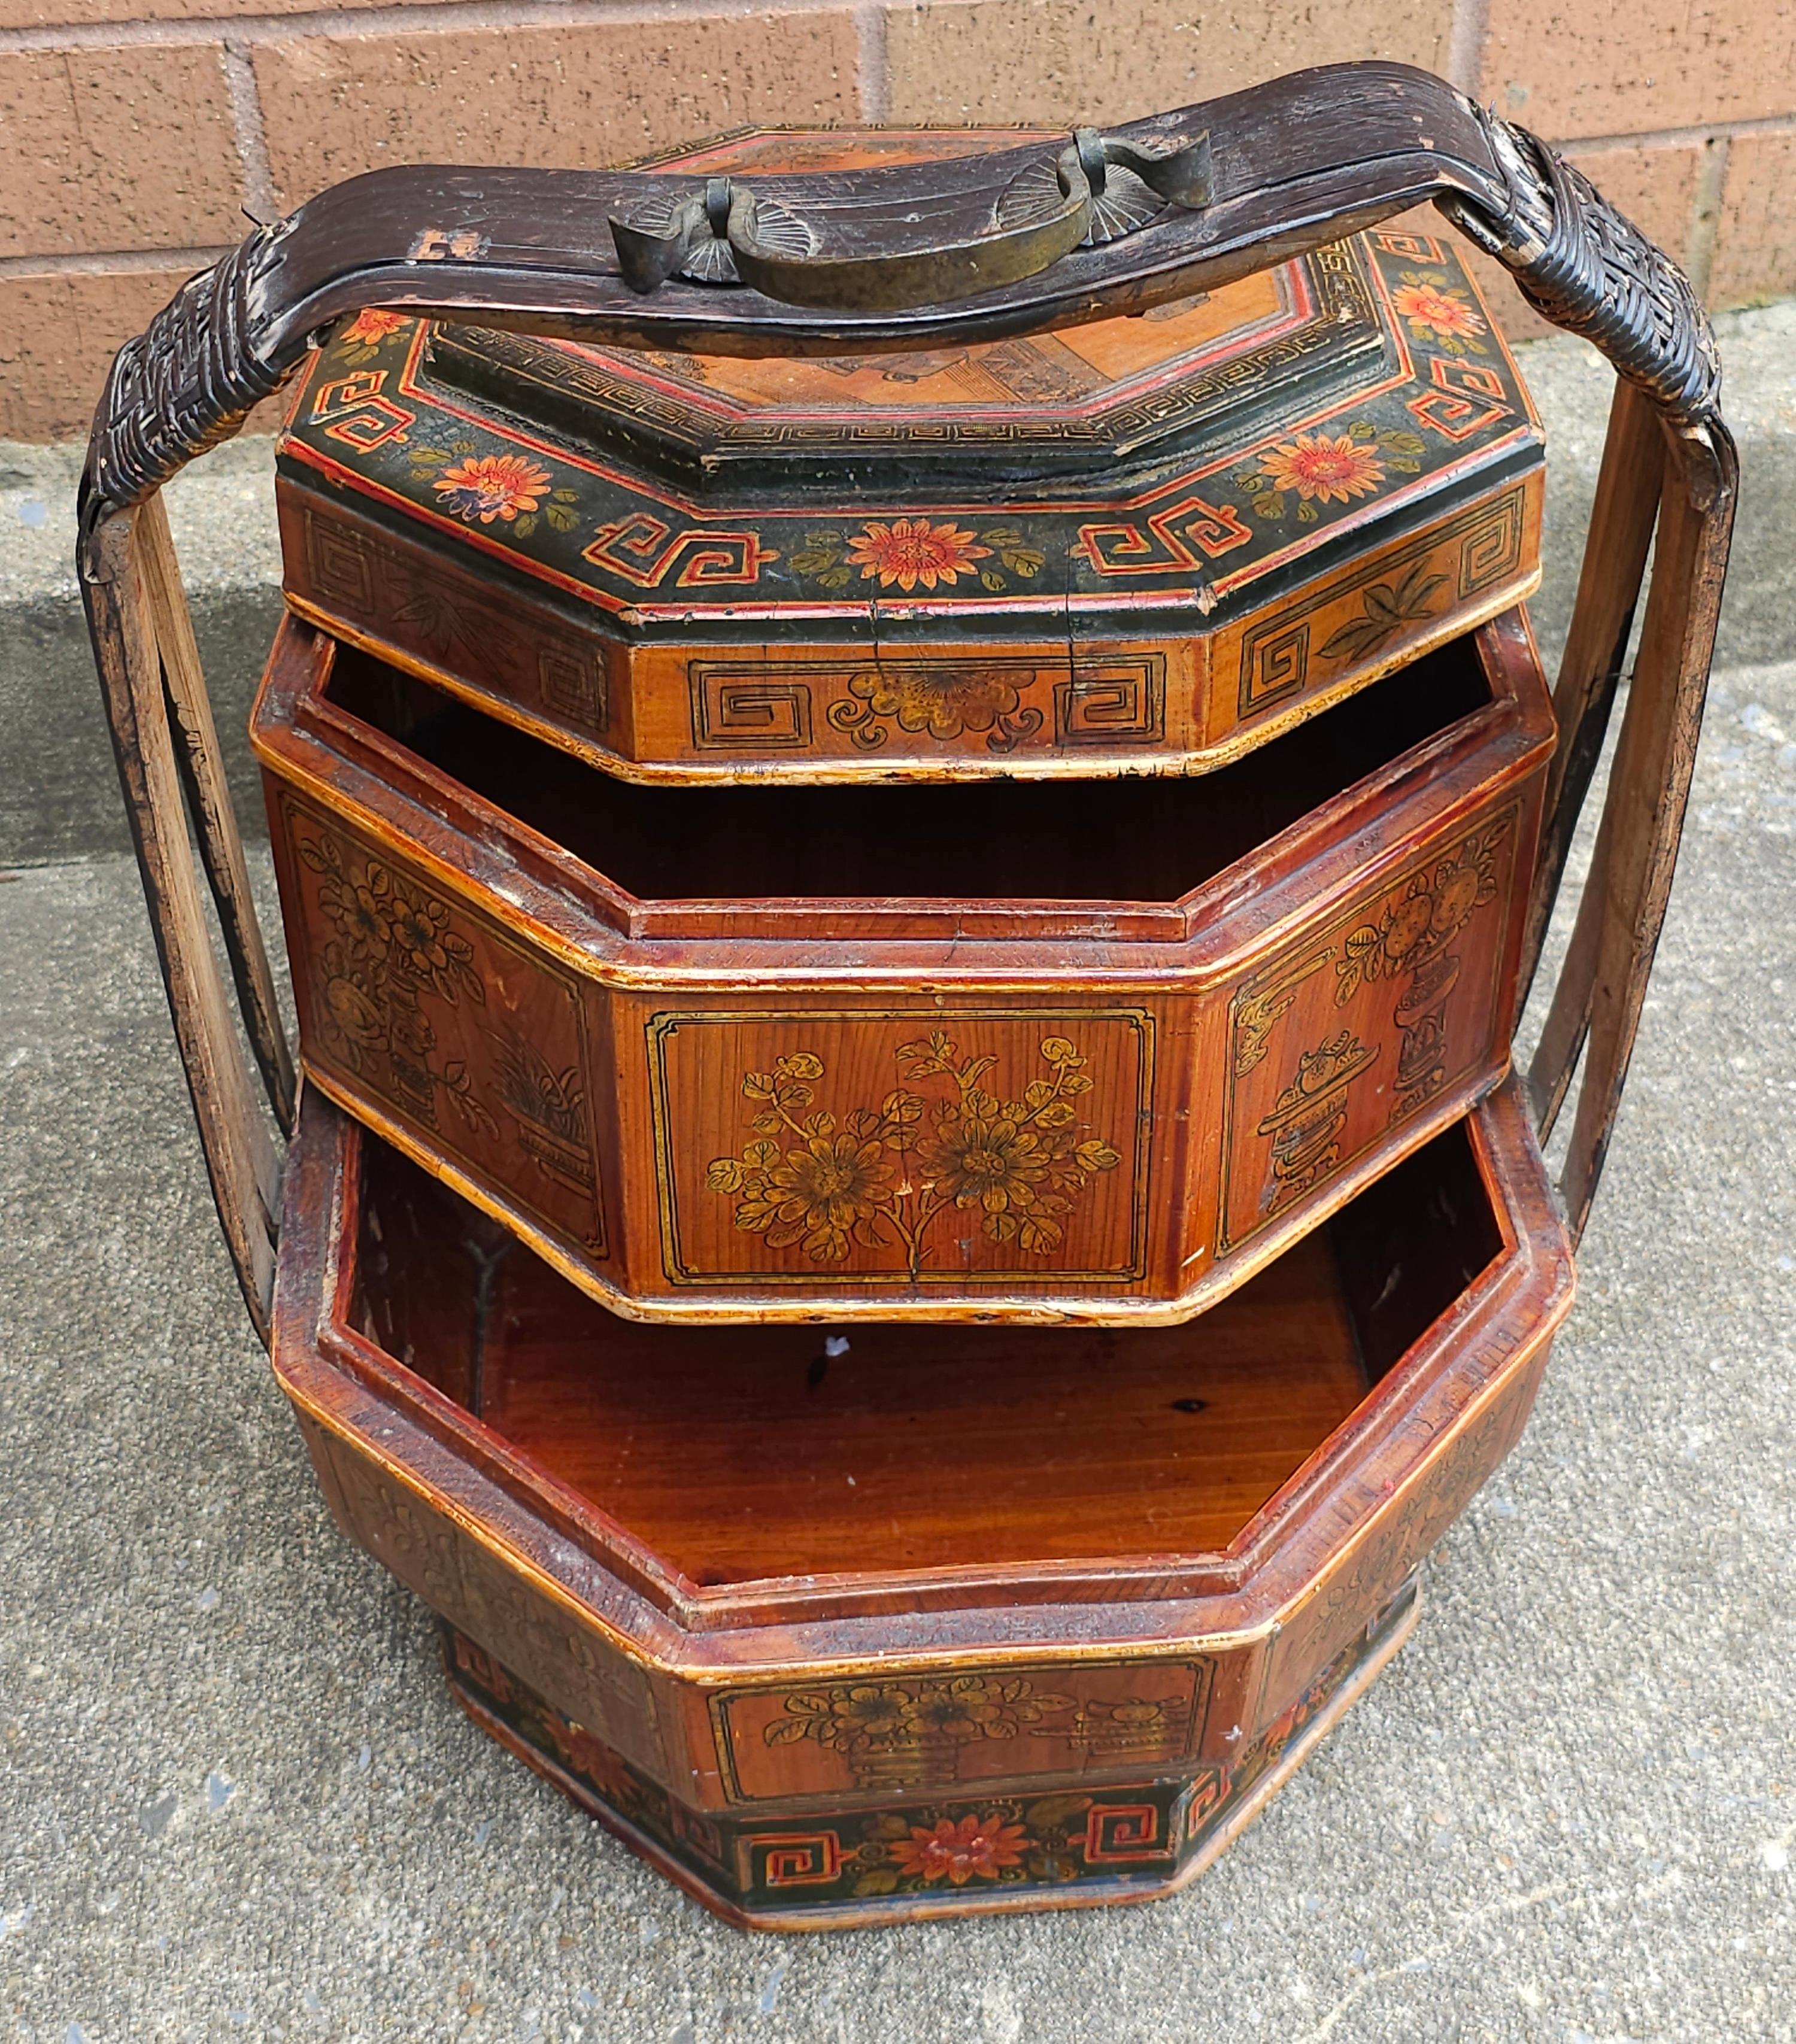 19th Century Asian Two-Tier Lacquered And Decorated Handled Basket In Good Condition For Sale In Germantown, MD